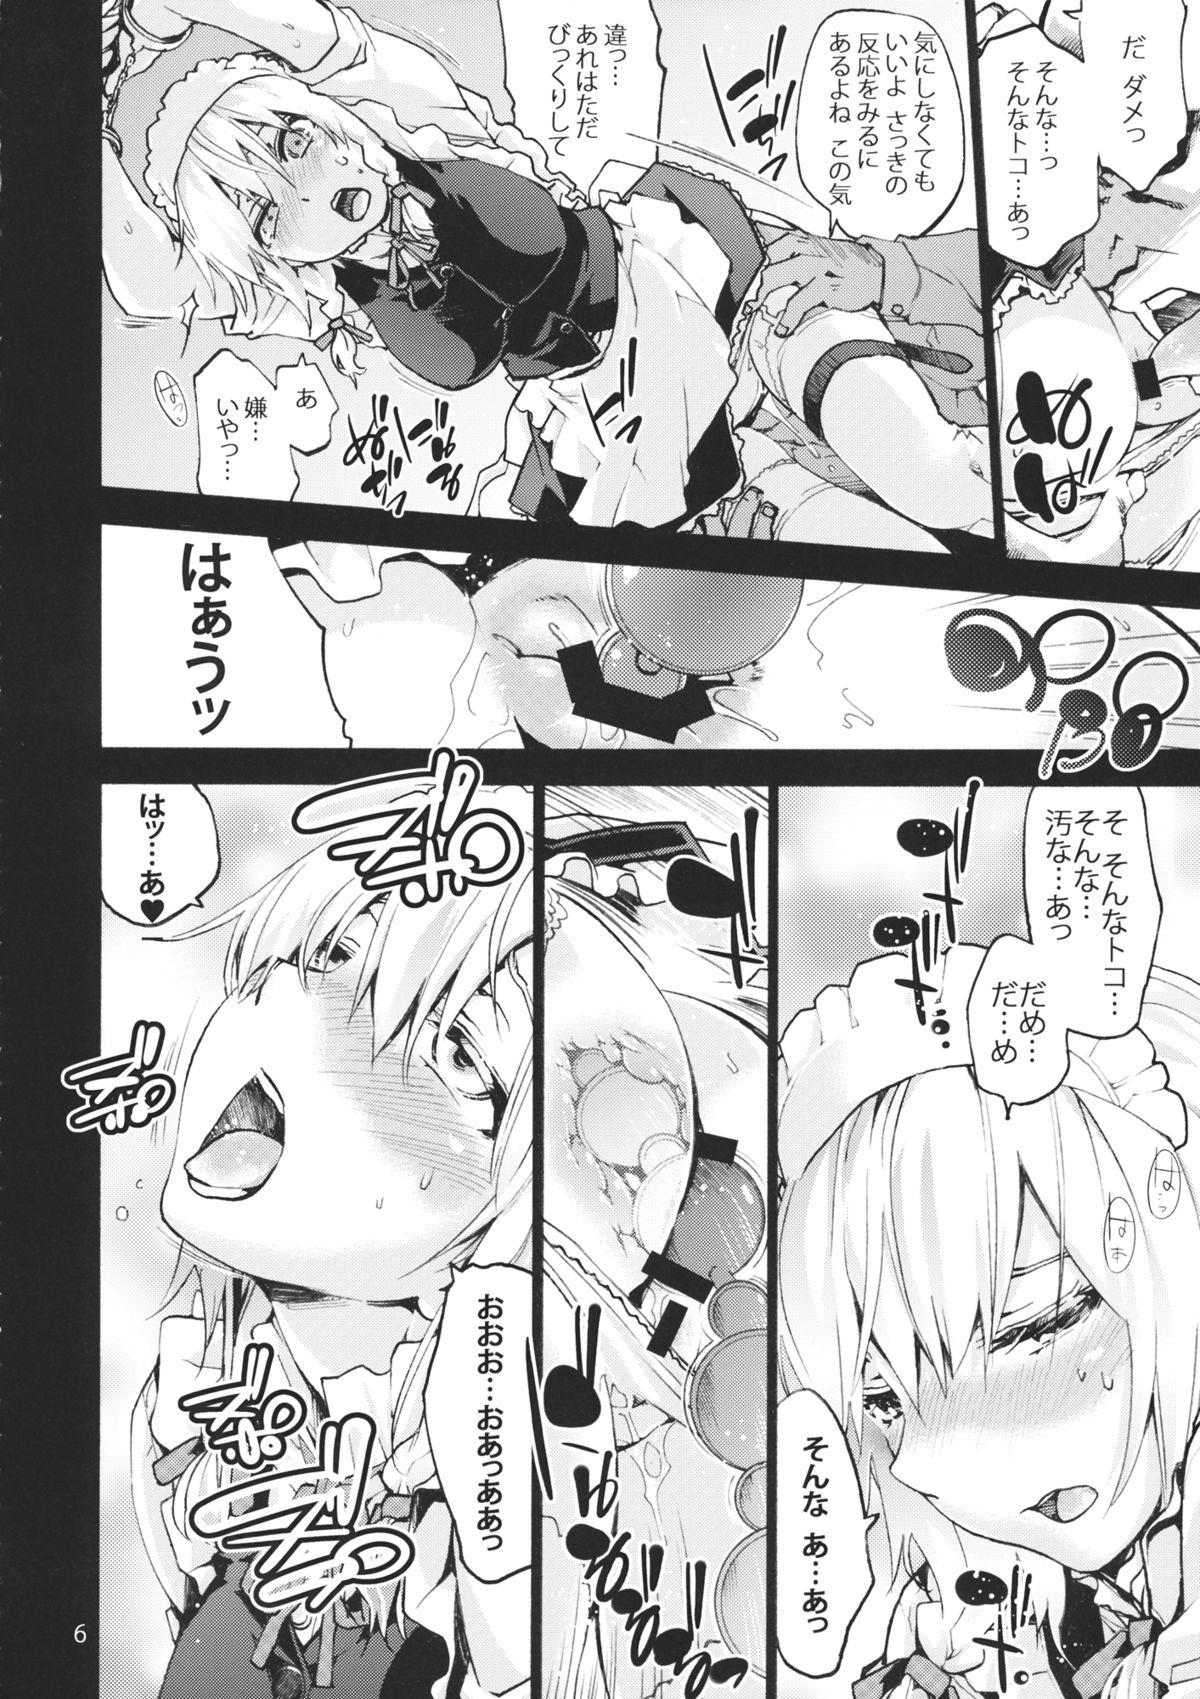 Hard Core Sex undressing, discharging - Touhou project Cheating Wife - Page 7